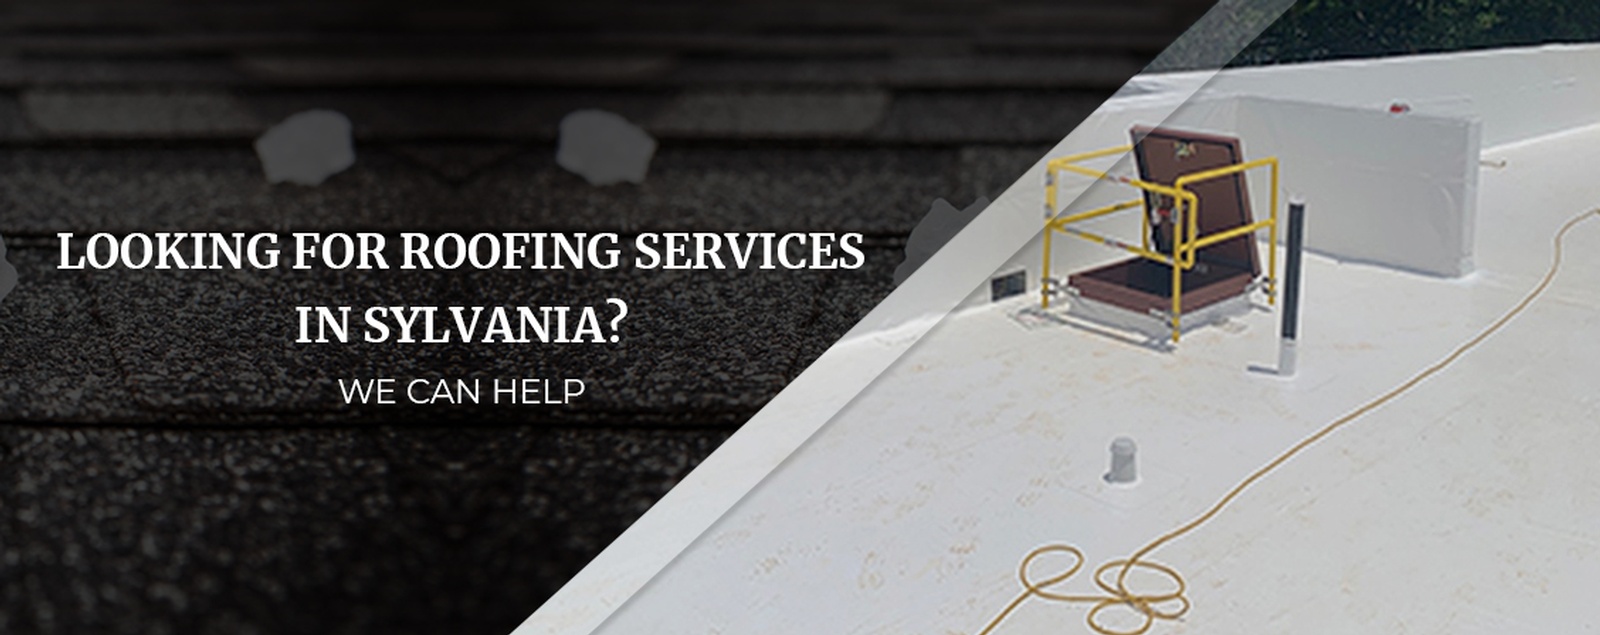 Looking For Roofing Services In Sylvania We Can Help